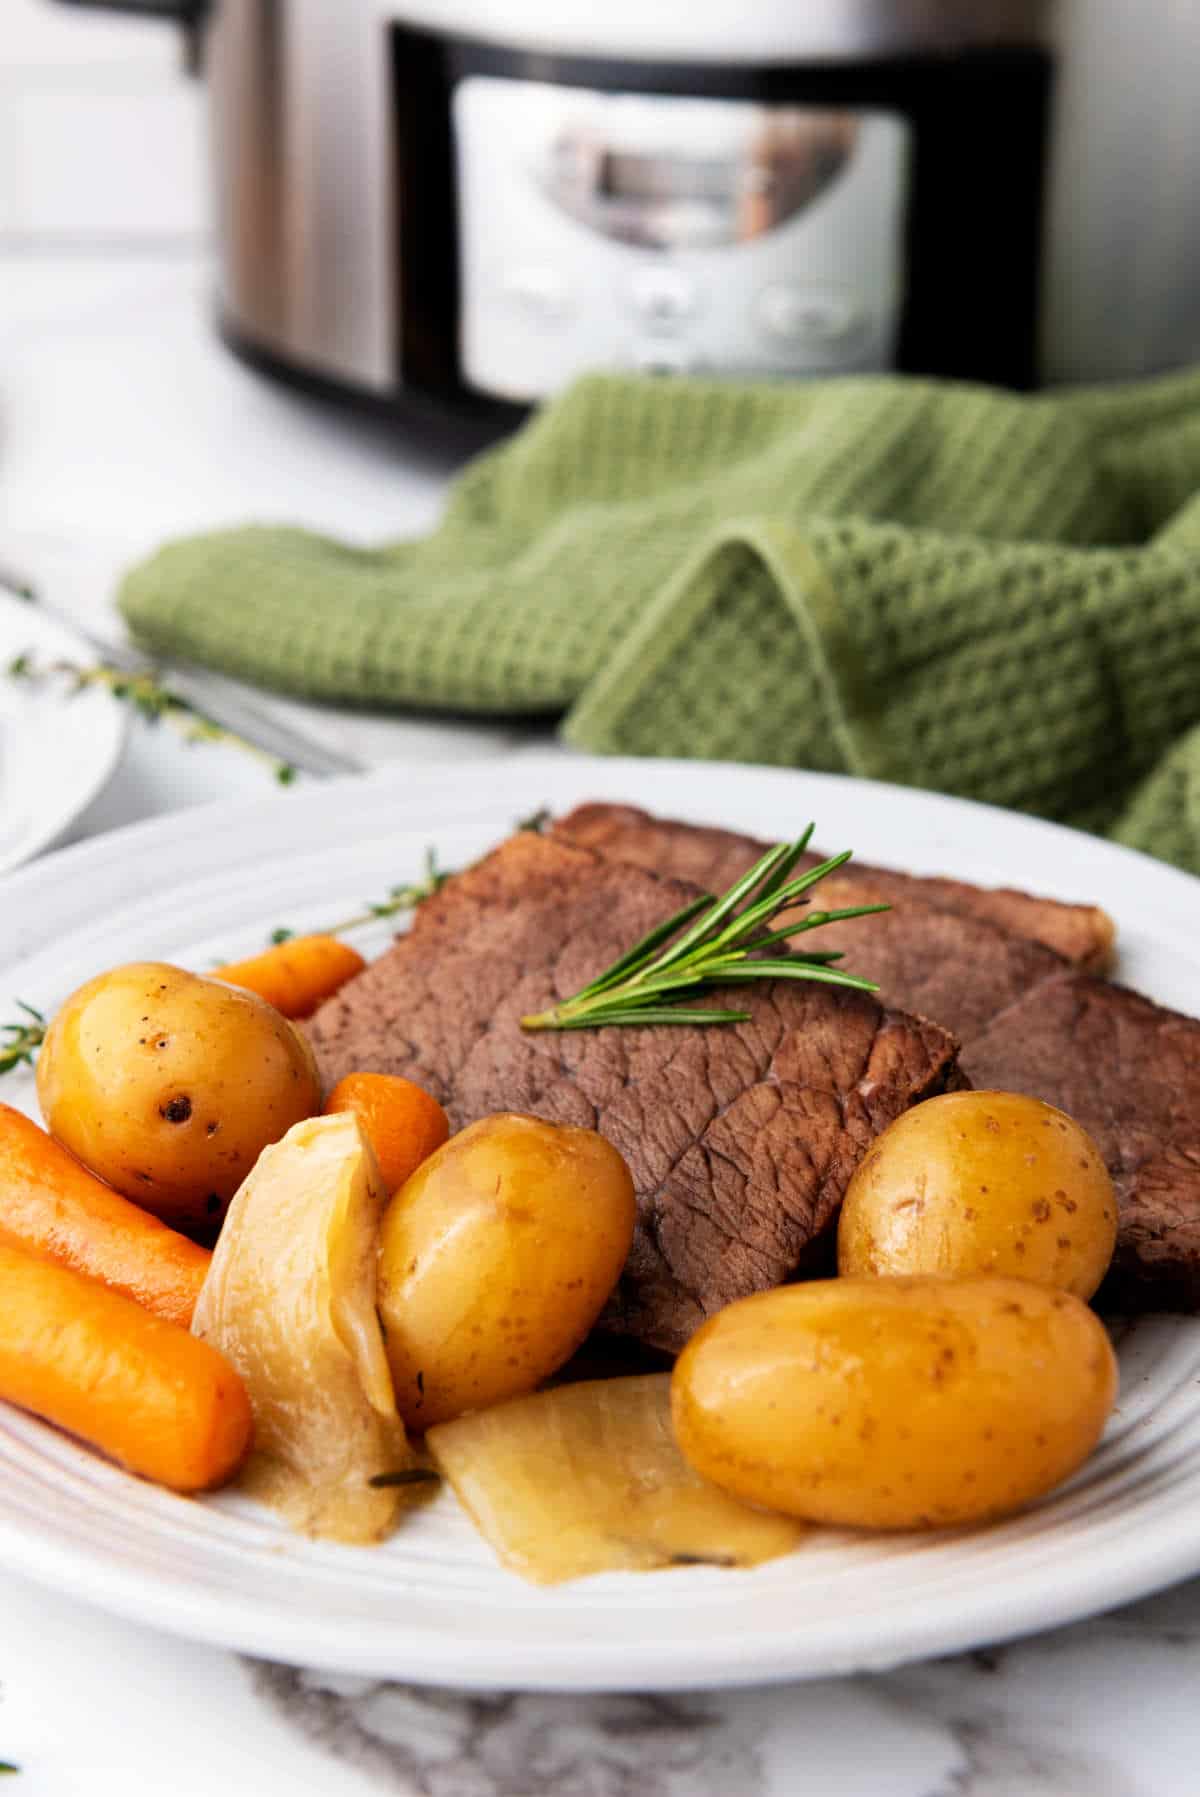 plate with slices of roast, potatoes, and carrots.